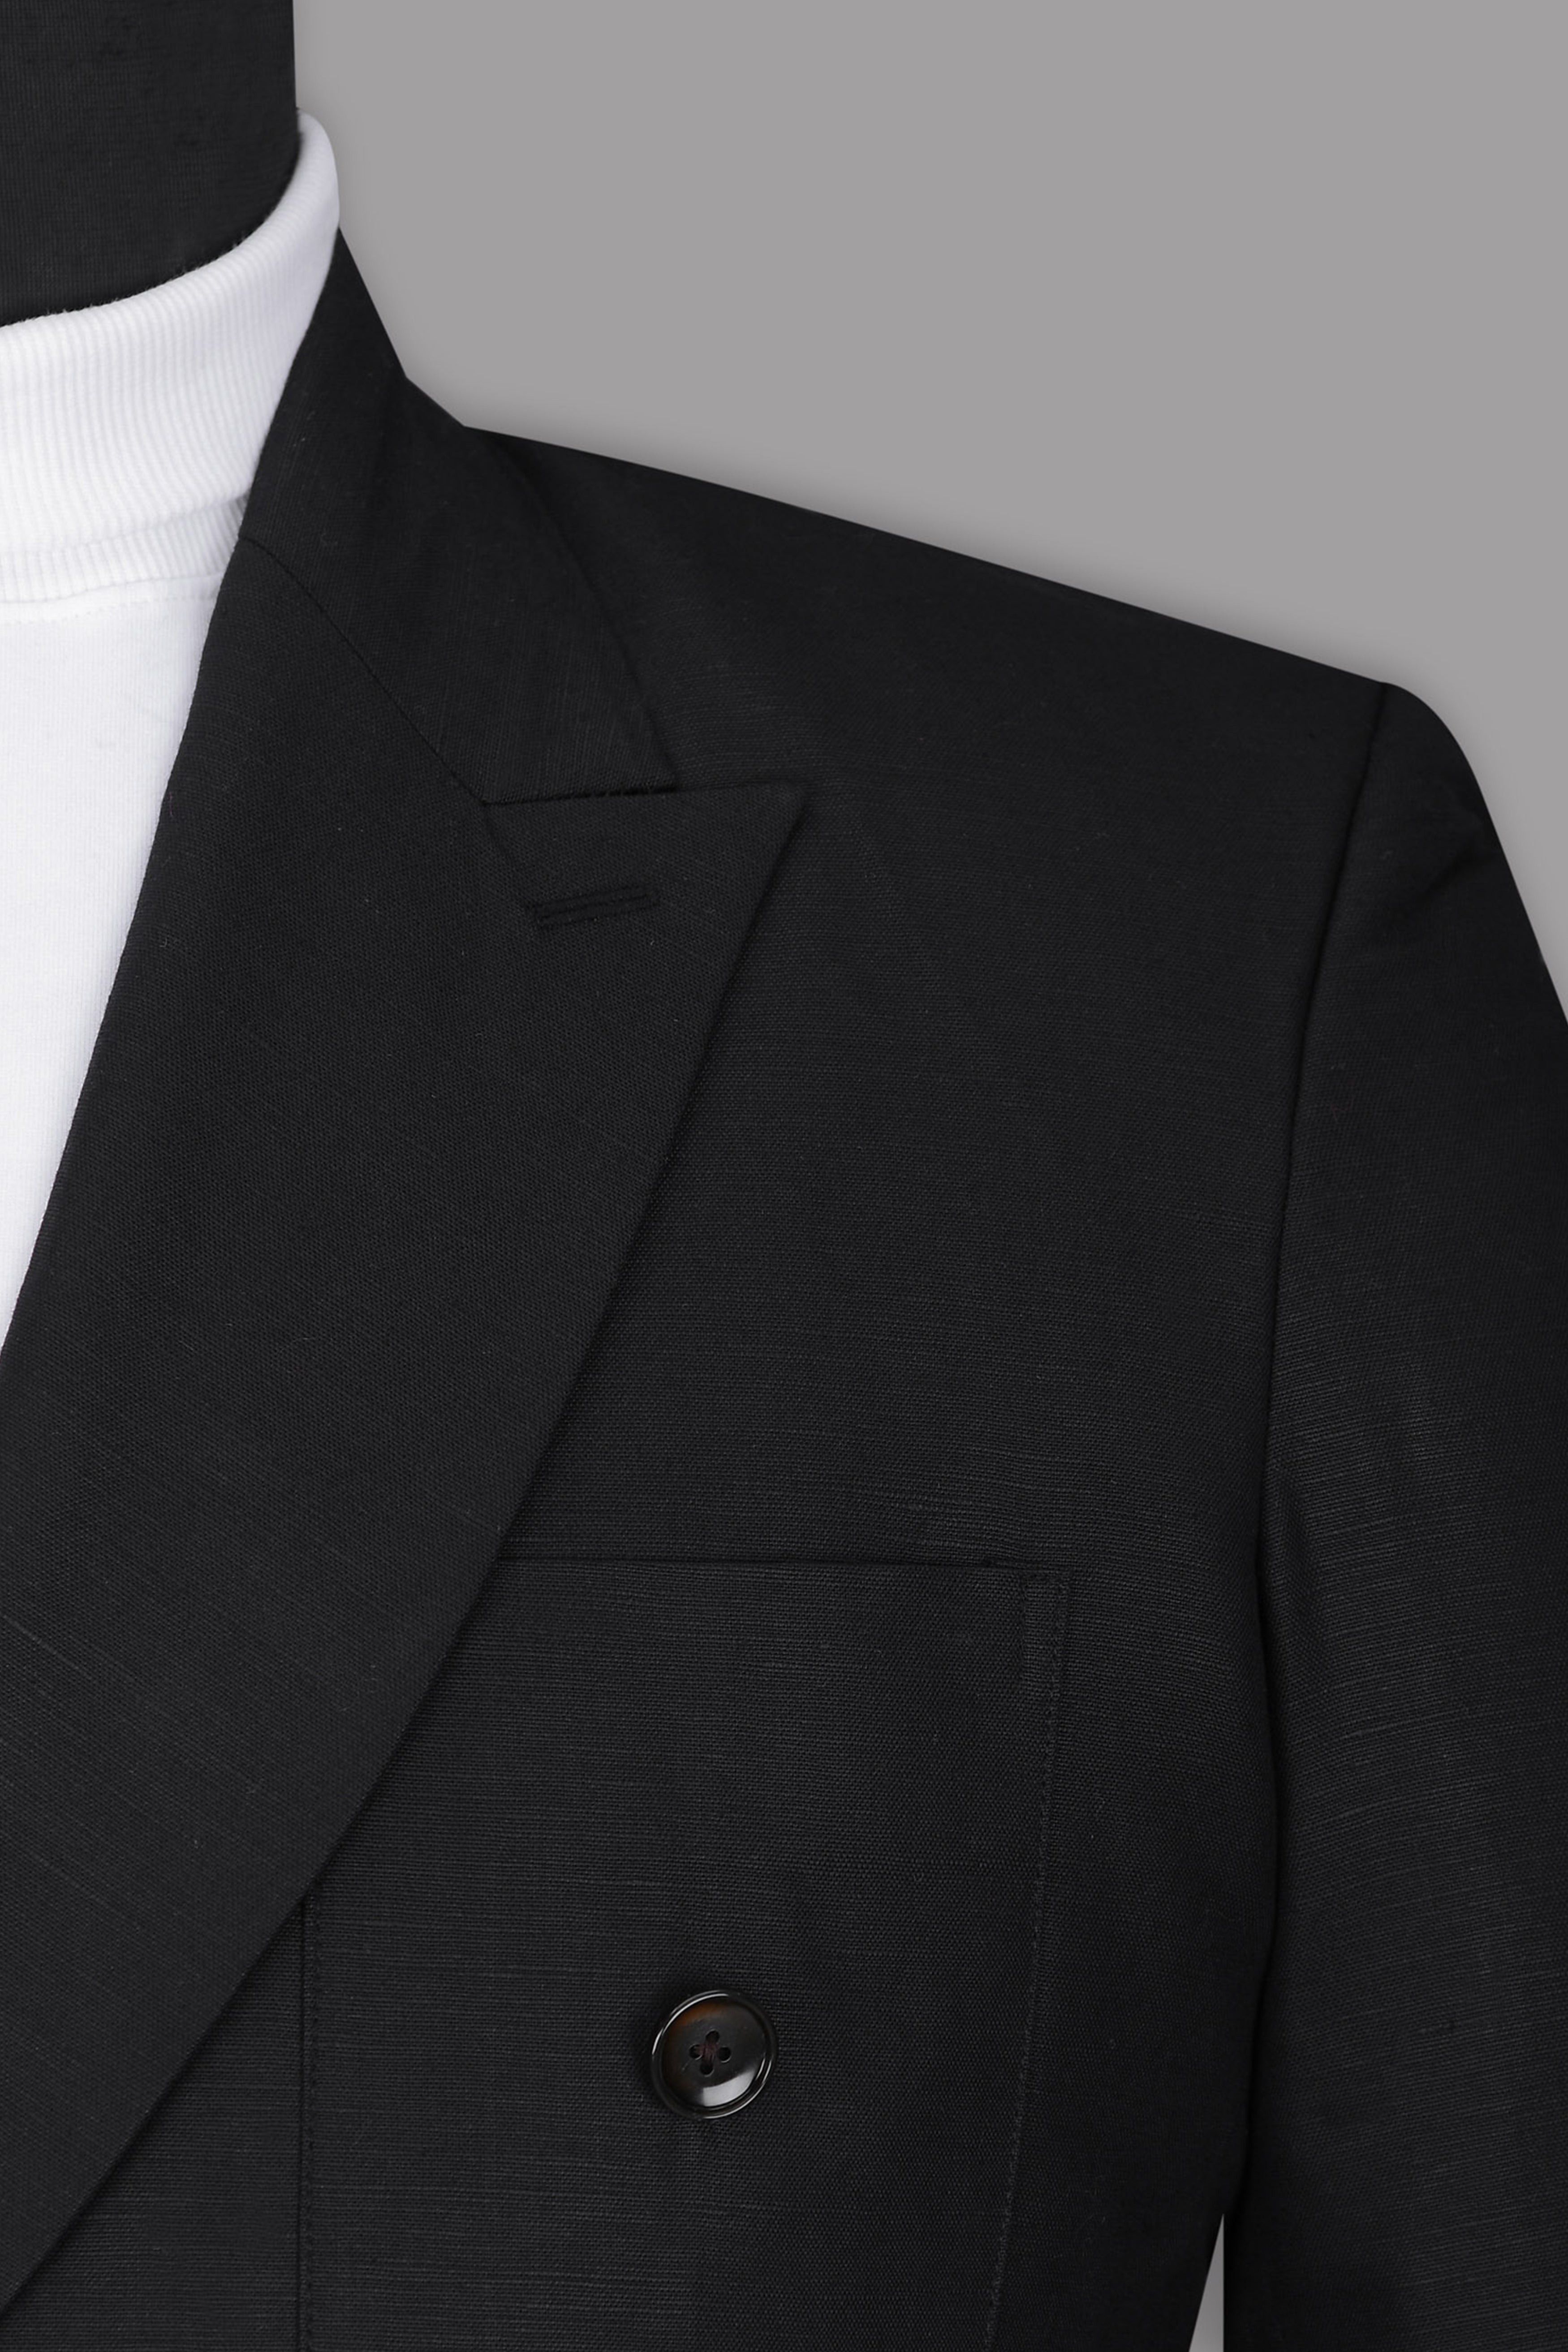 Jet Black Solid Luxurious Linen Double-breasted Sports Blazer